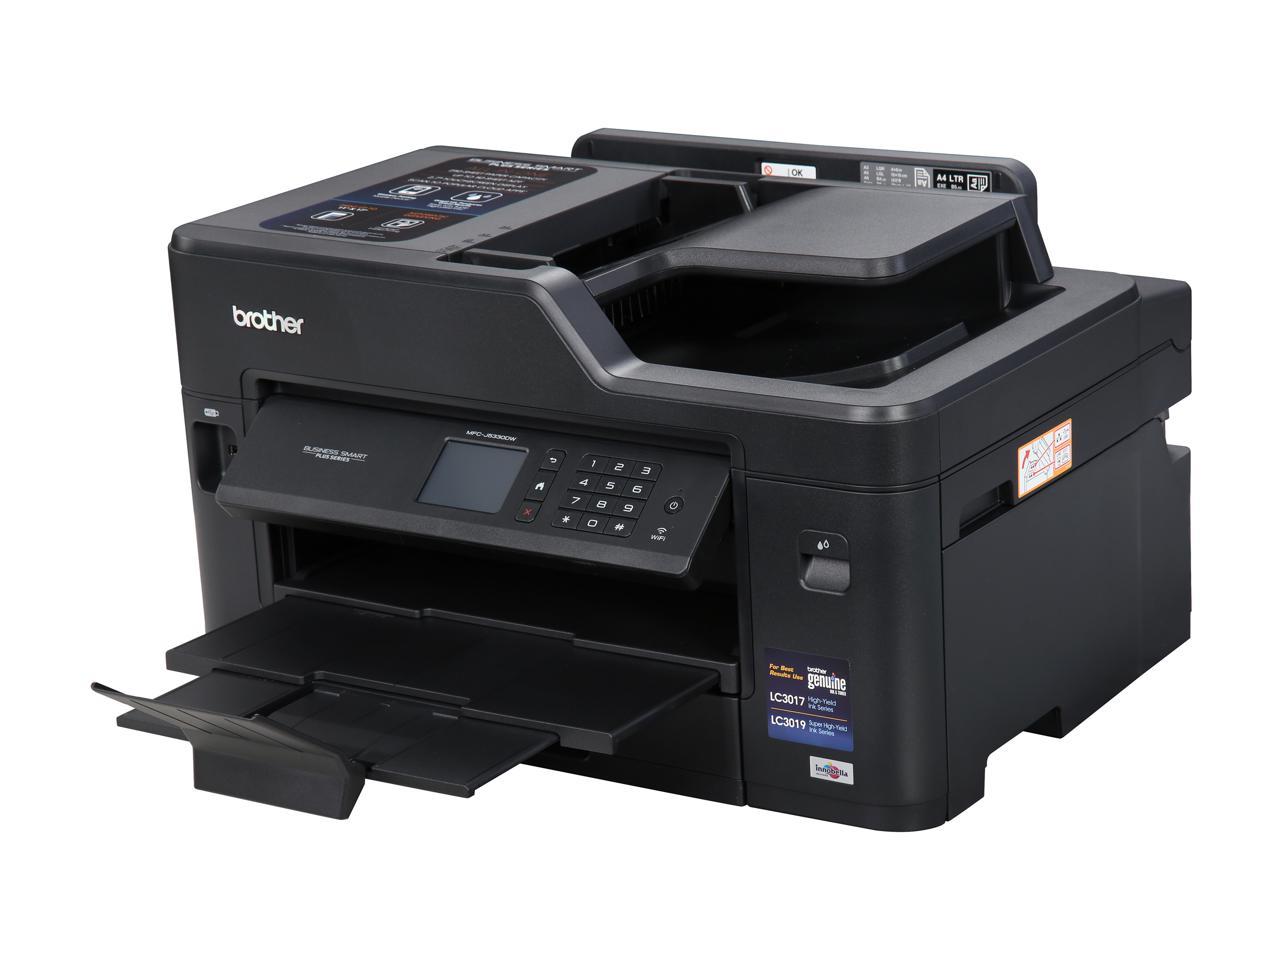 Brother MFC-J5330DW All-in-One Wireless Color Inkjet Printer with Automatic Duplex Printing